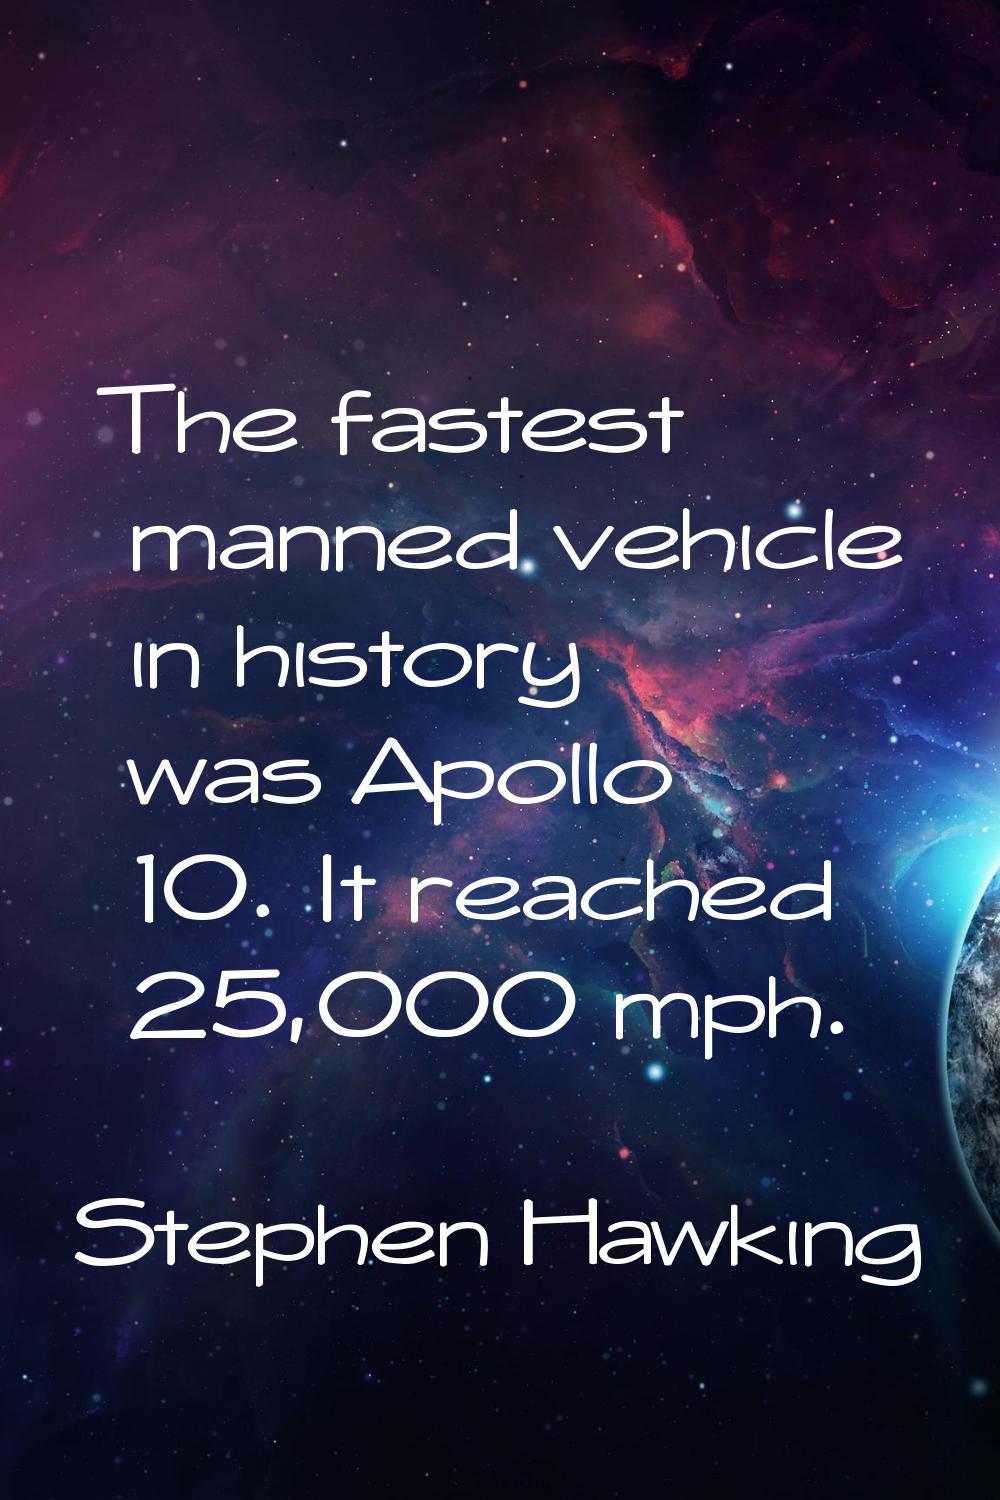 The fastest manned vehicle in history was Apollo 10. It reached 25,000 mph.